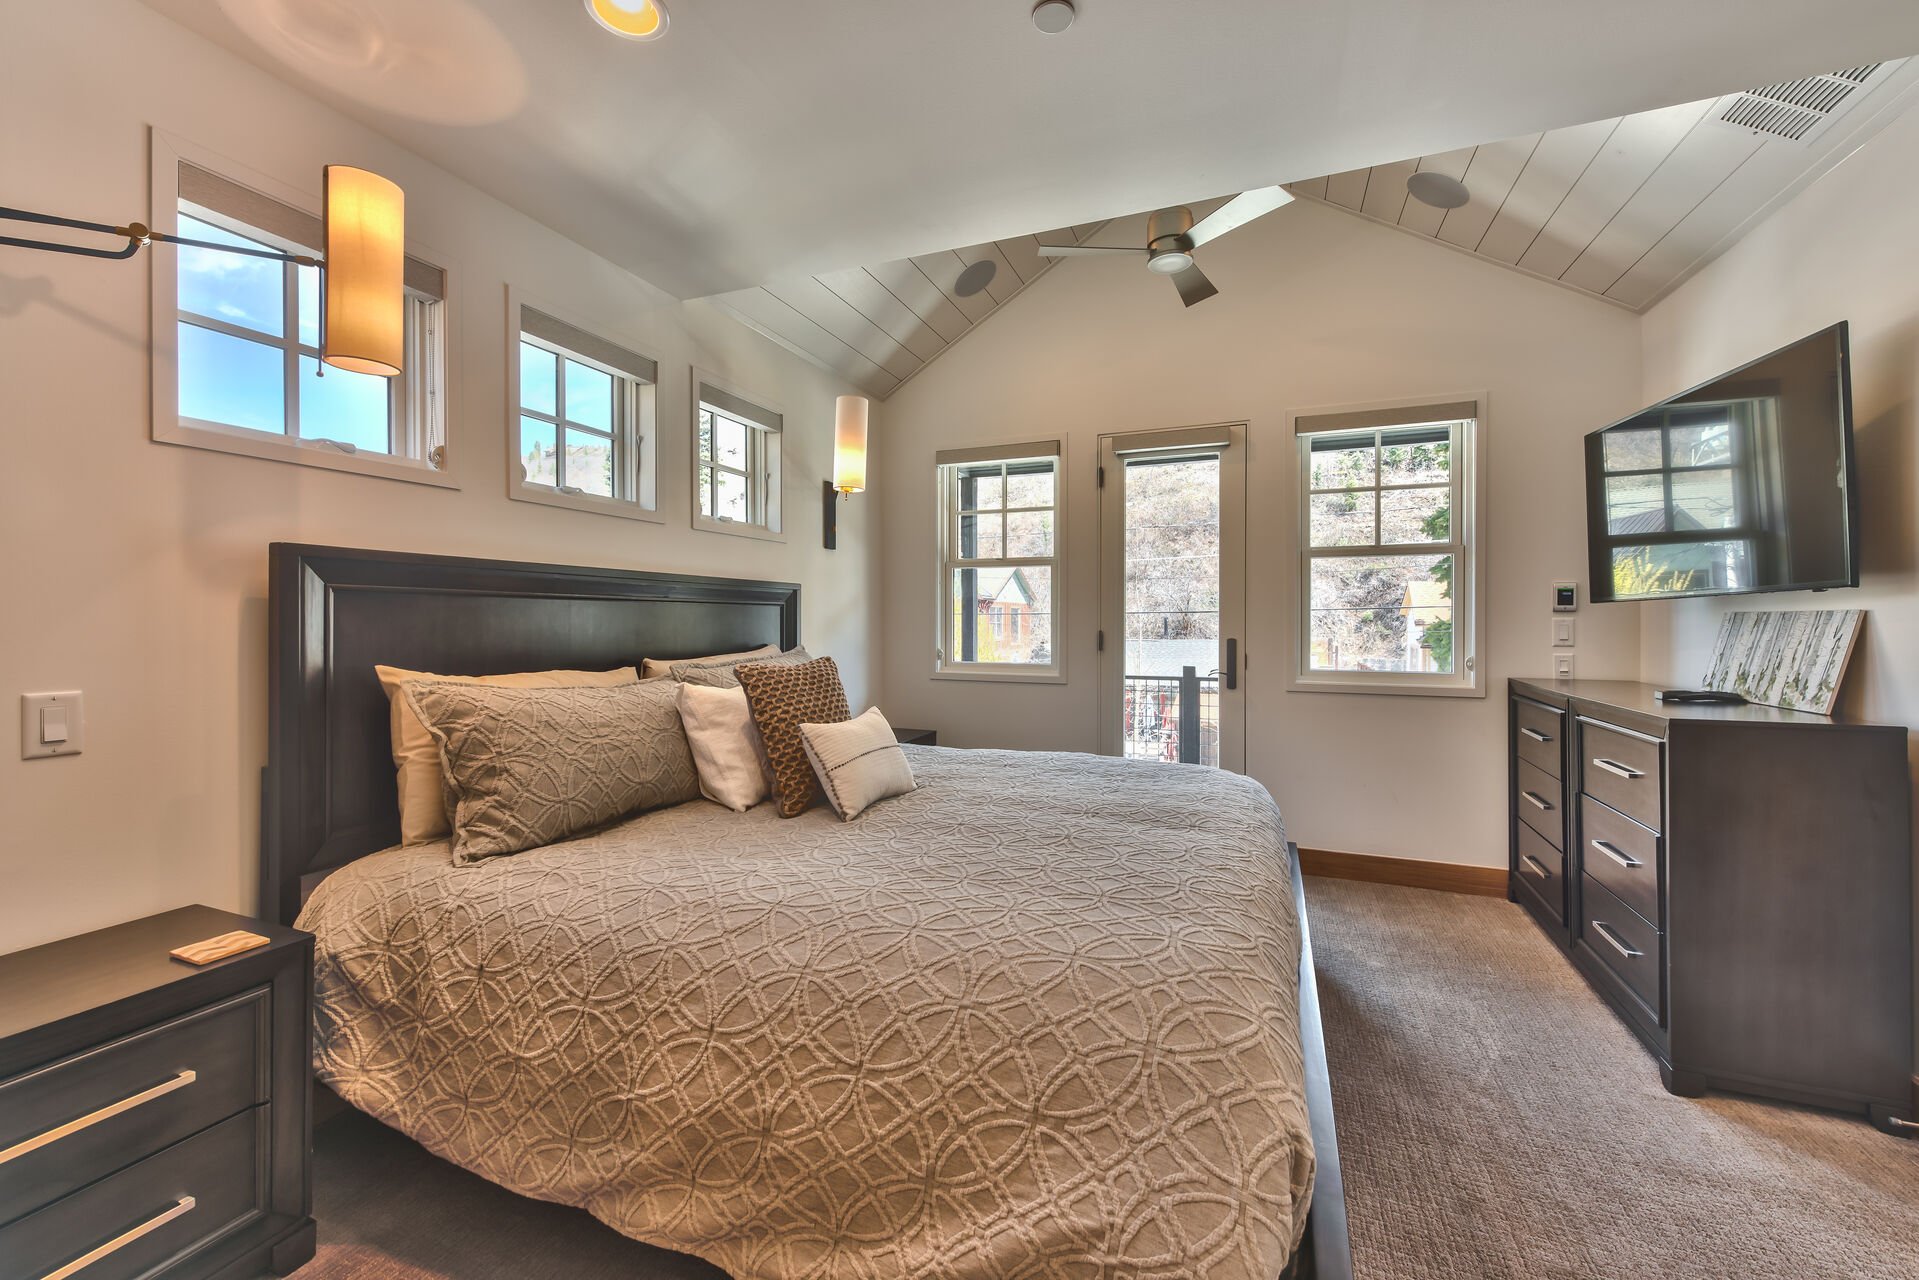 Grand Master Bedroom with King Bed, Smart TV, and Private Juliette Balcony with Park City Views